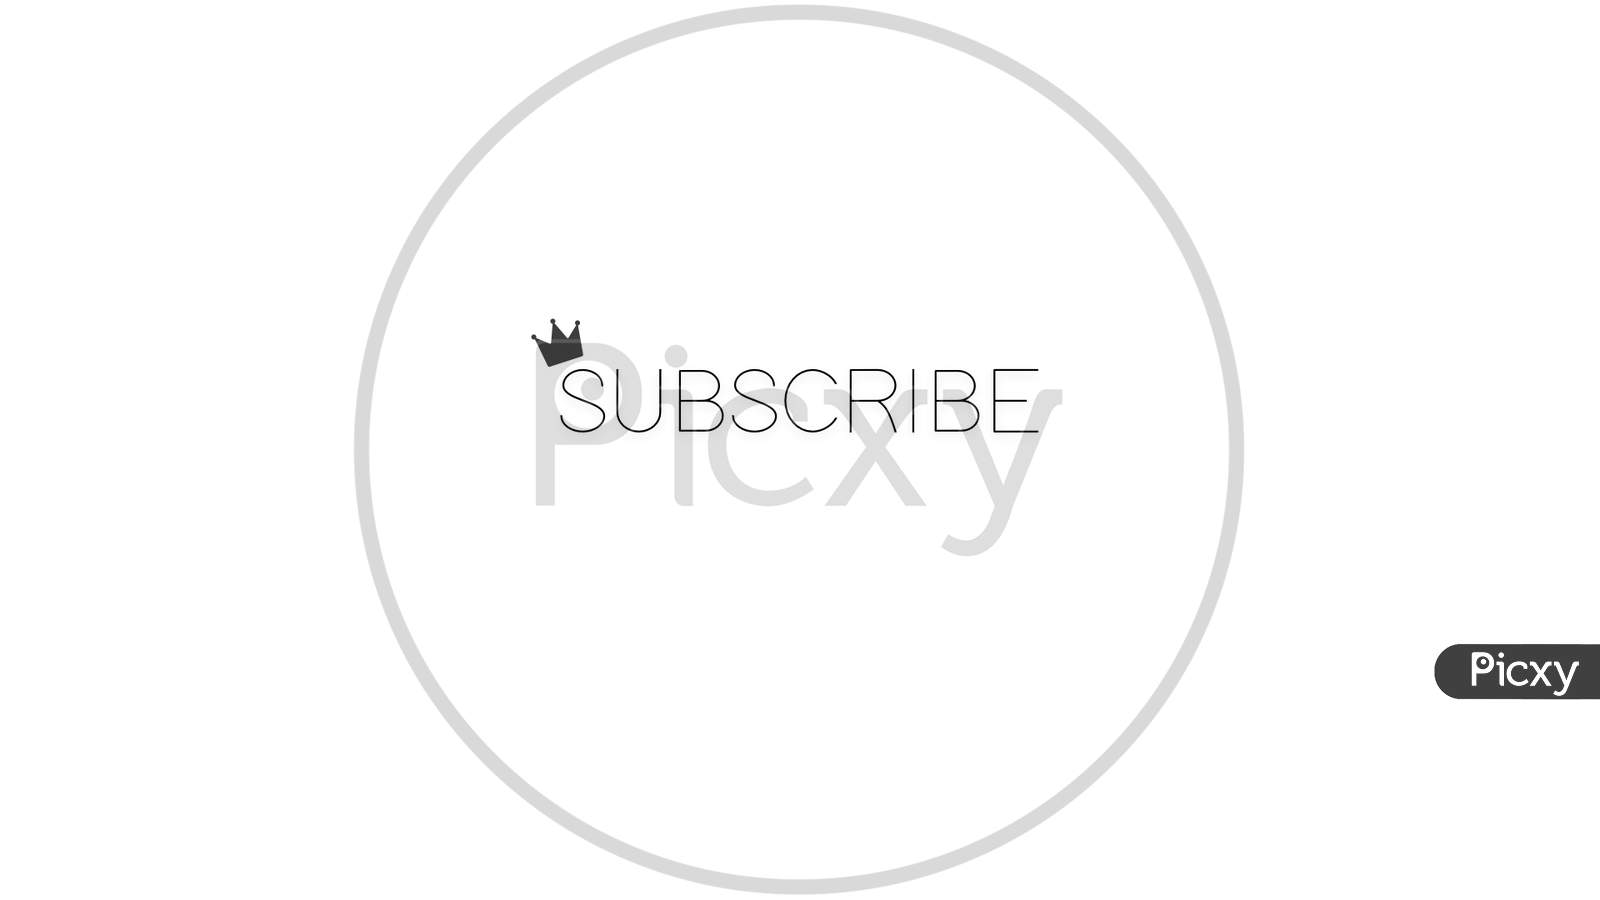 A simple and minimalist Subscribe button